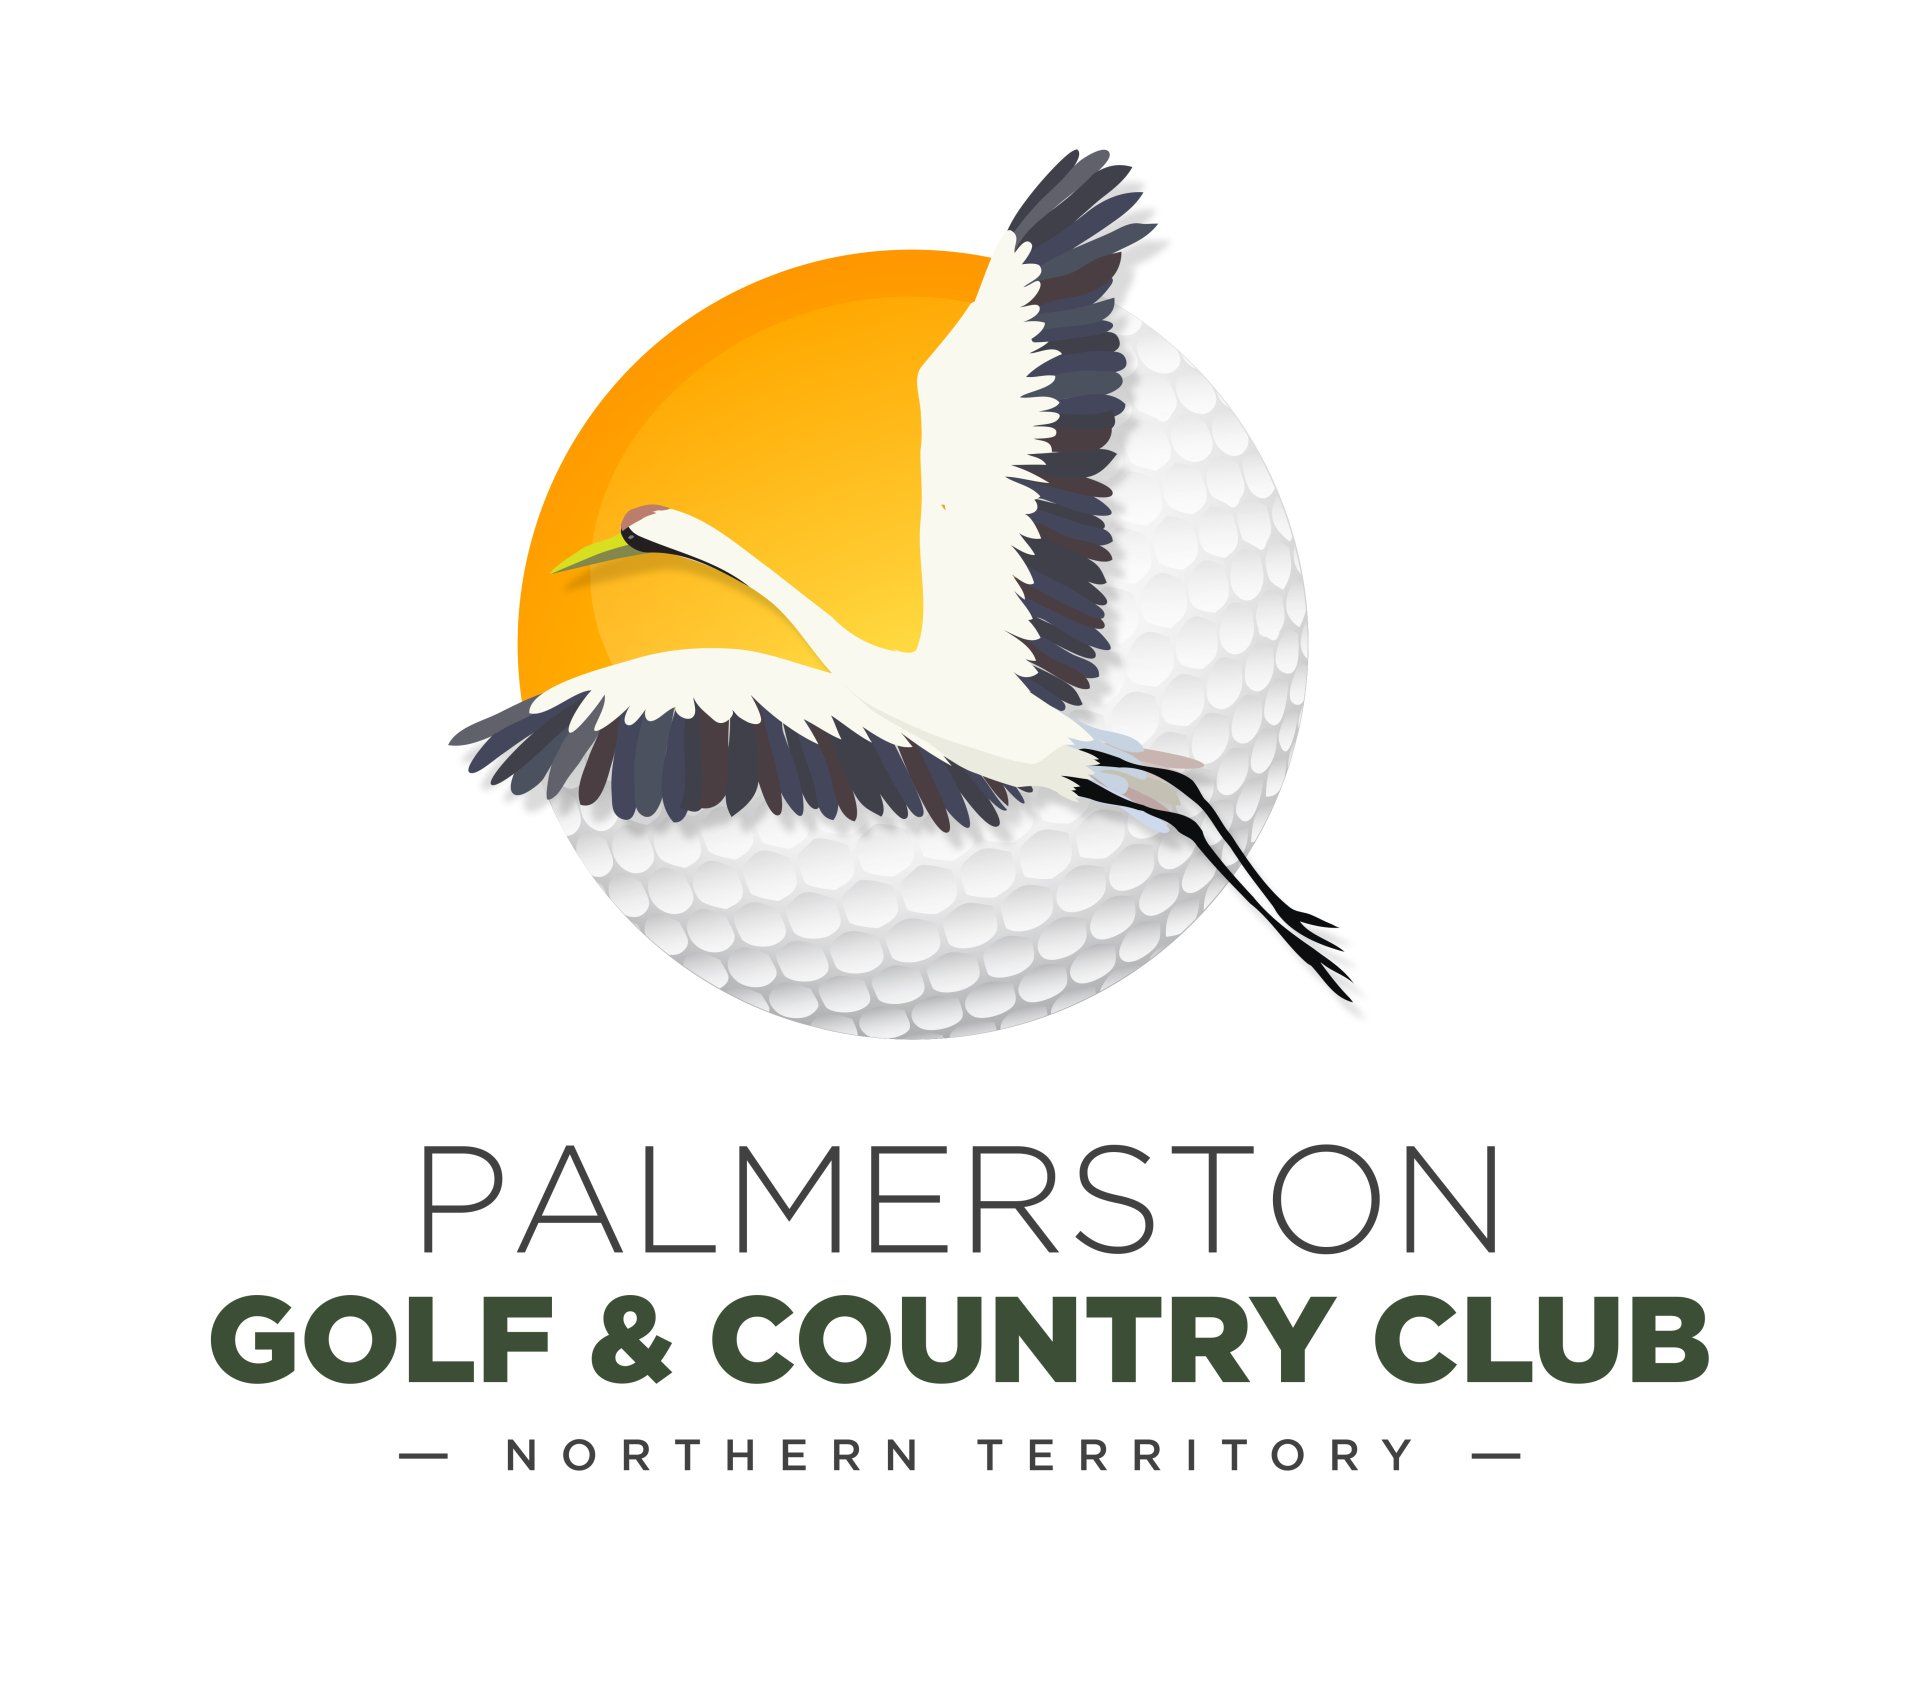 Palmerston Golf and Country Club